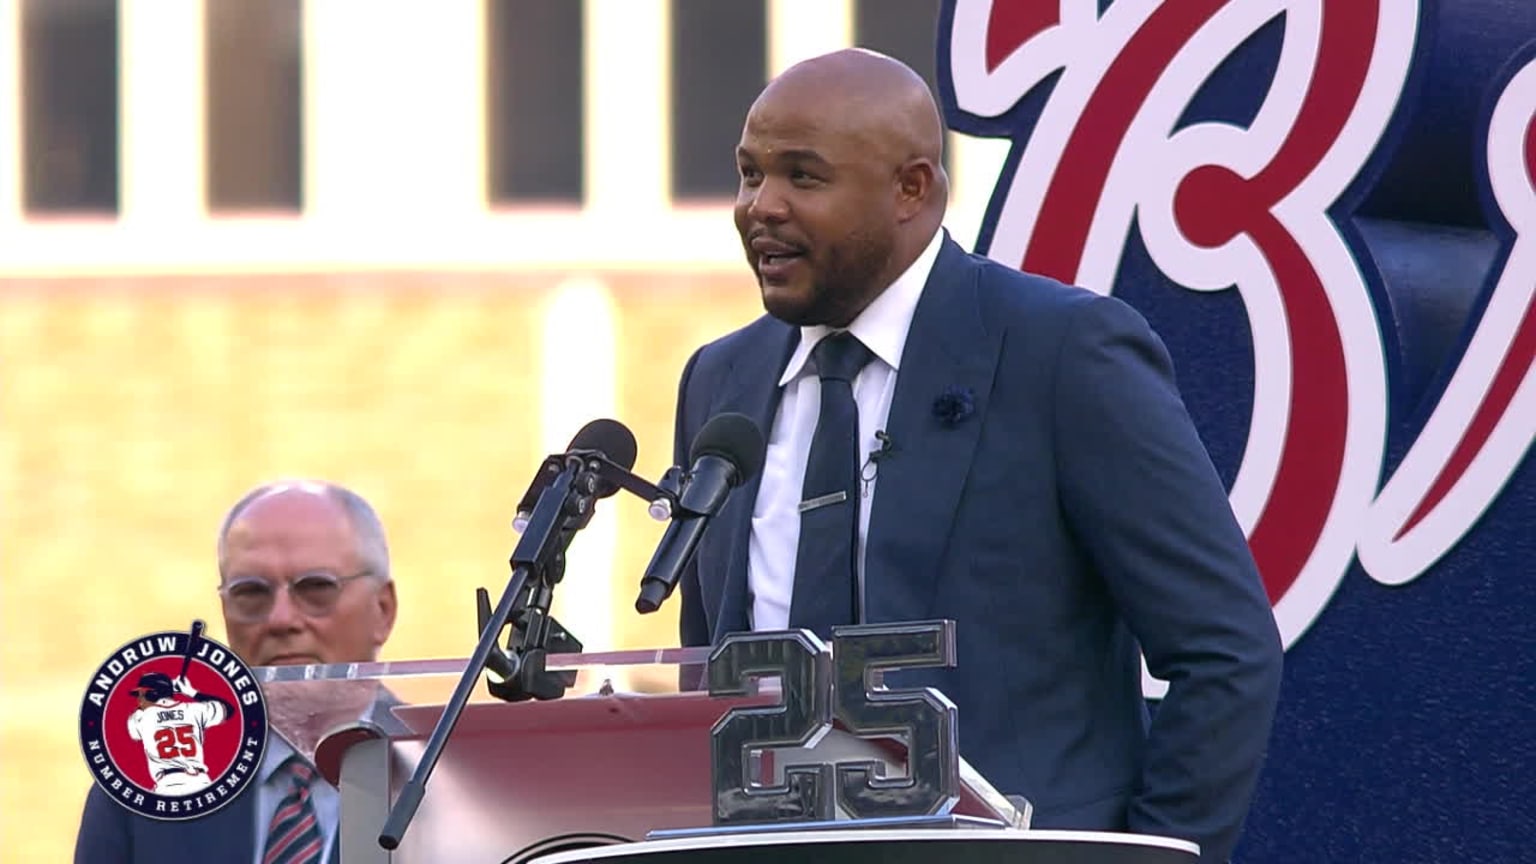 Andruw Jones to Have No. 25 Braves Jersey Retired; Played 12 Years